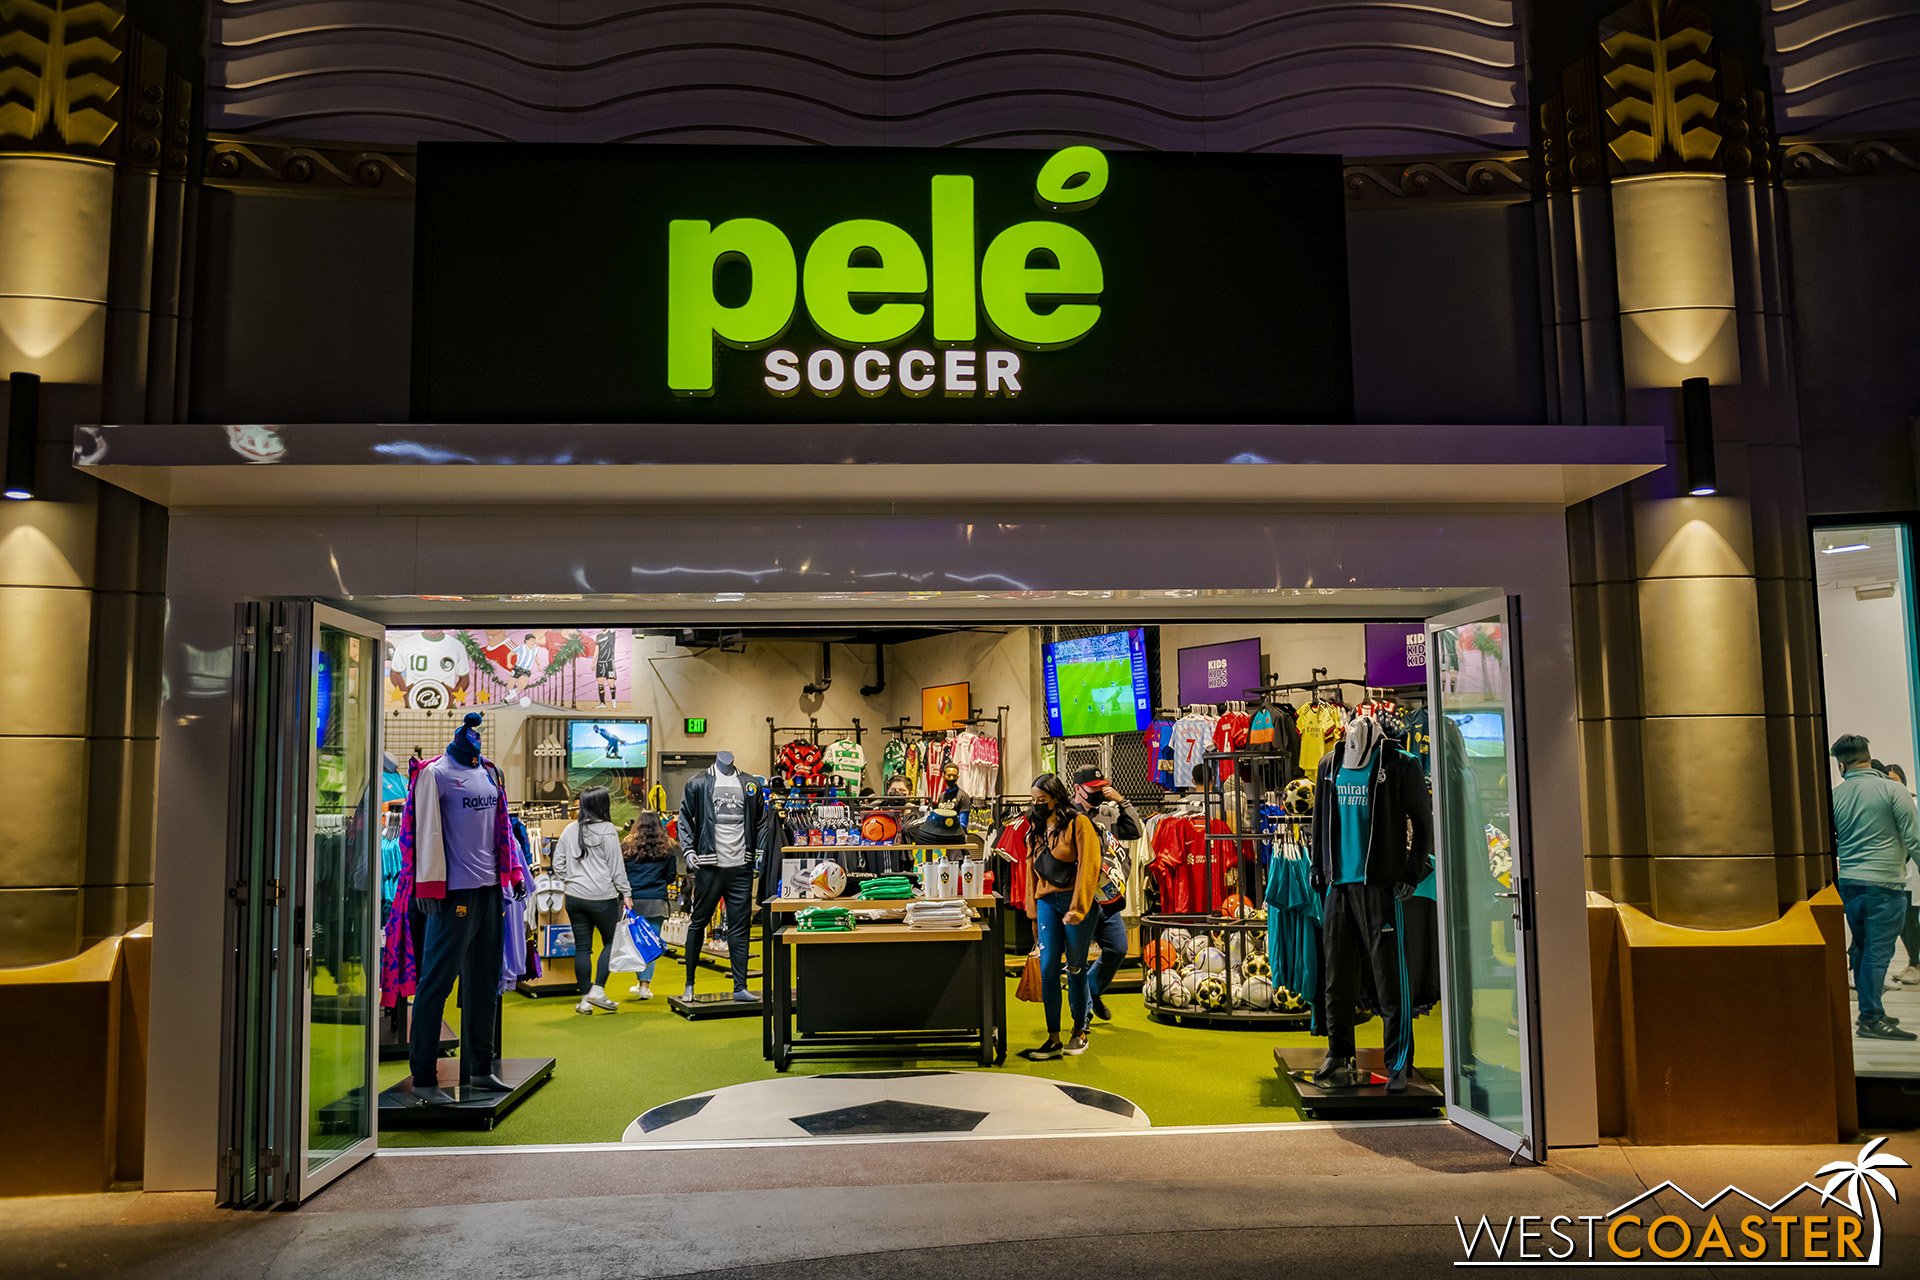  The VOID closed down a year and a half ago, and last month, a new Pele Soccer store opened in its place. 